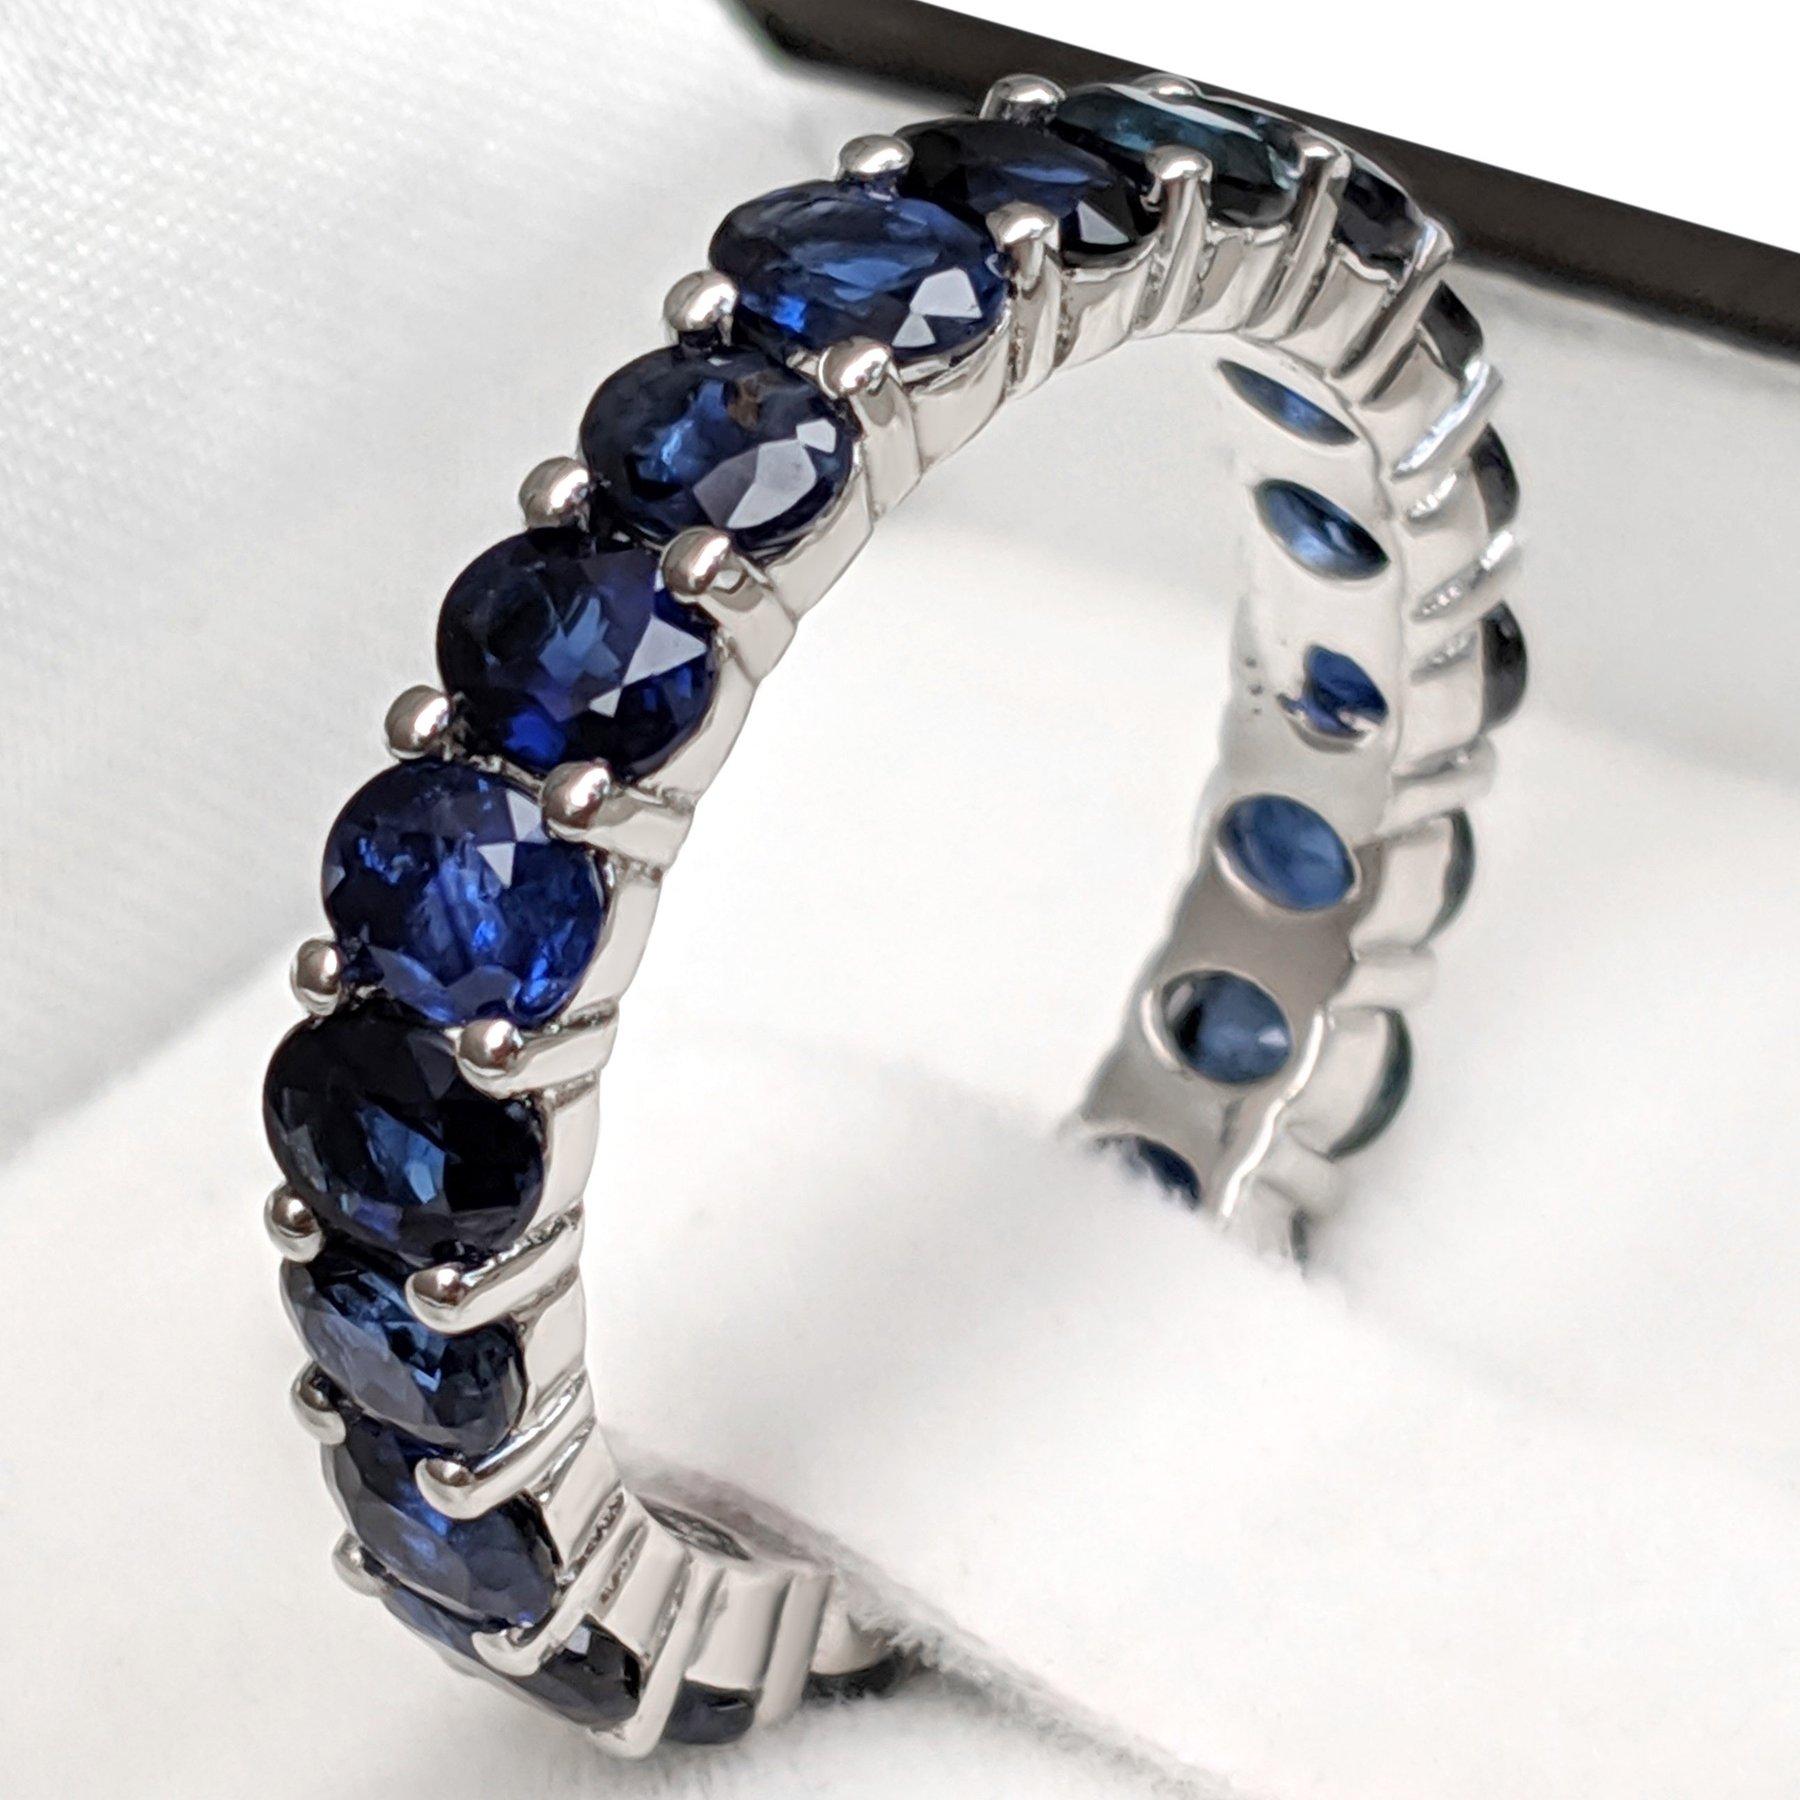 This ring is definitely a show stopper and will draw attention wherever you go! A great gift for yourself or your loved one - a heirloom piece to treasure forever!

Ring Size: 56 EU

Center Natural Sapphire:
Weight: 4.55 ct, 21 stones
Color: